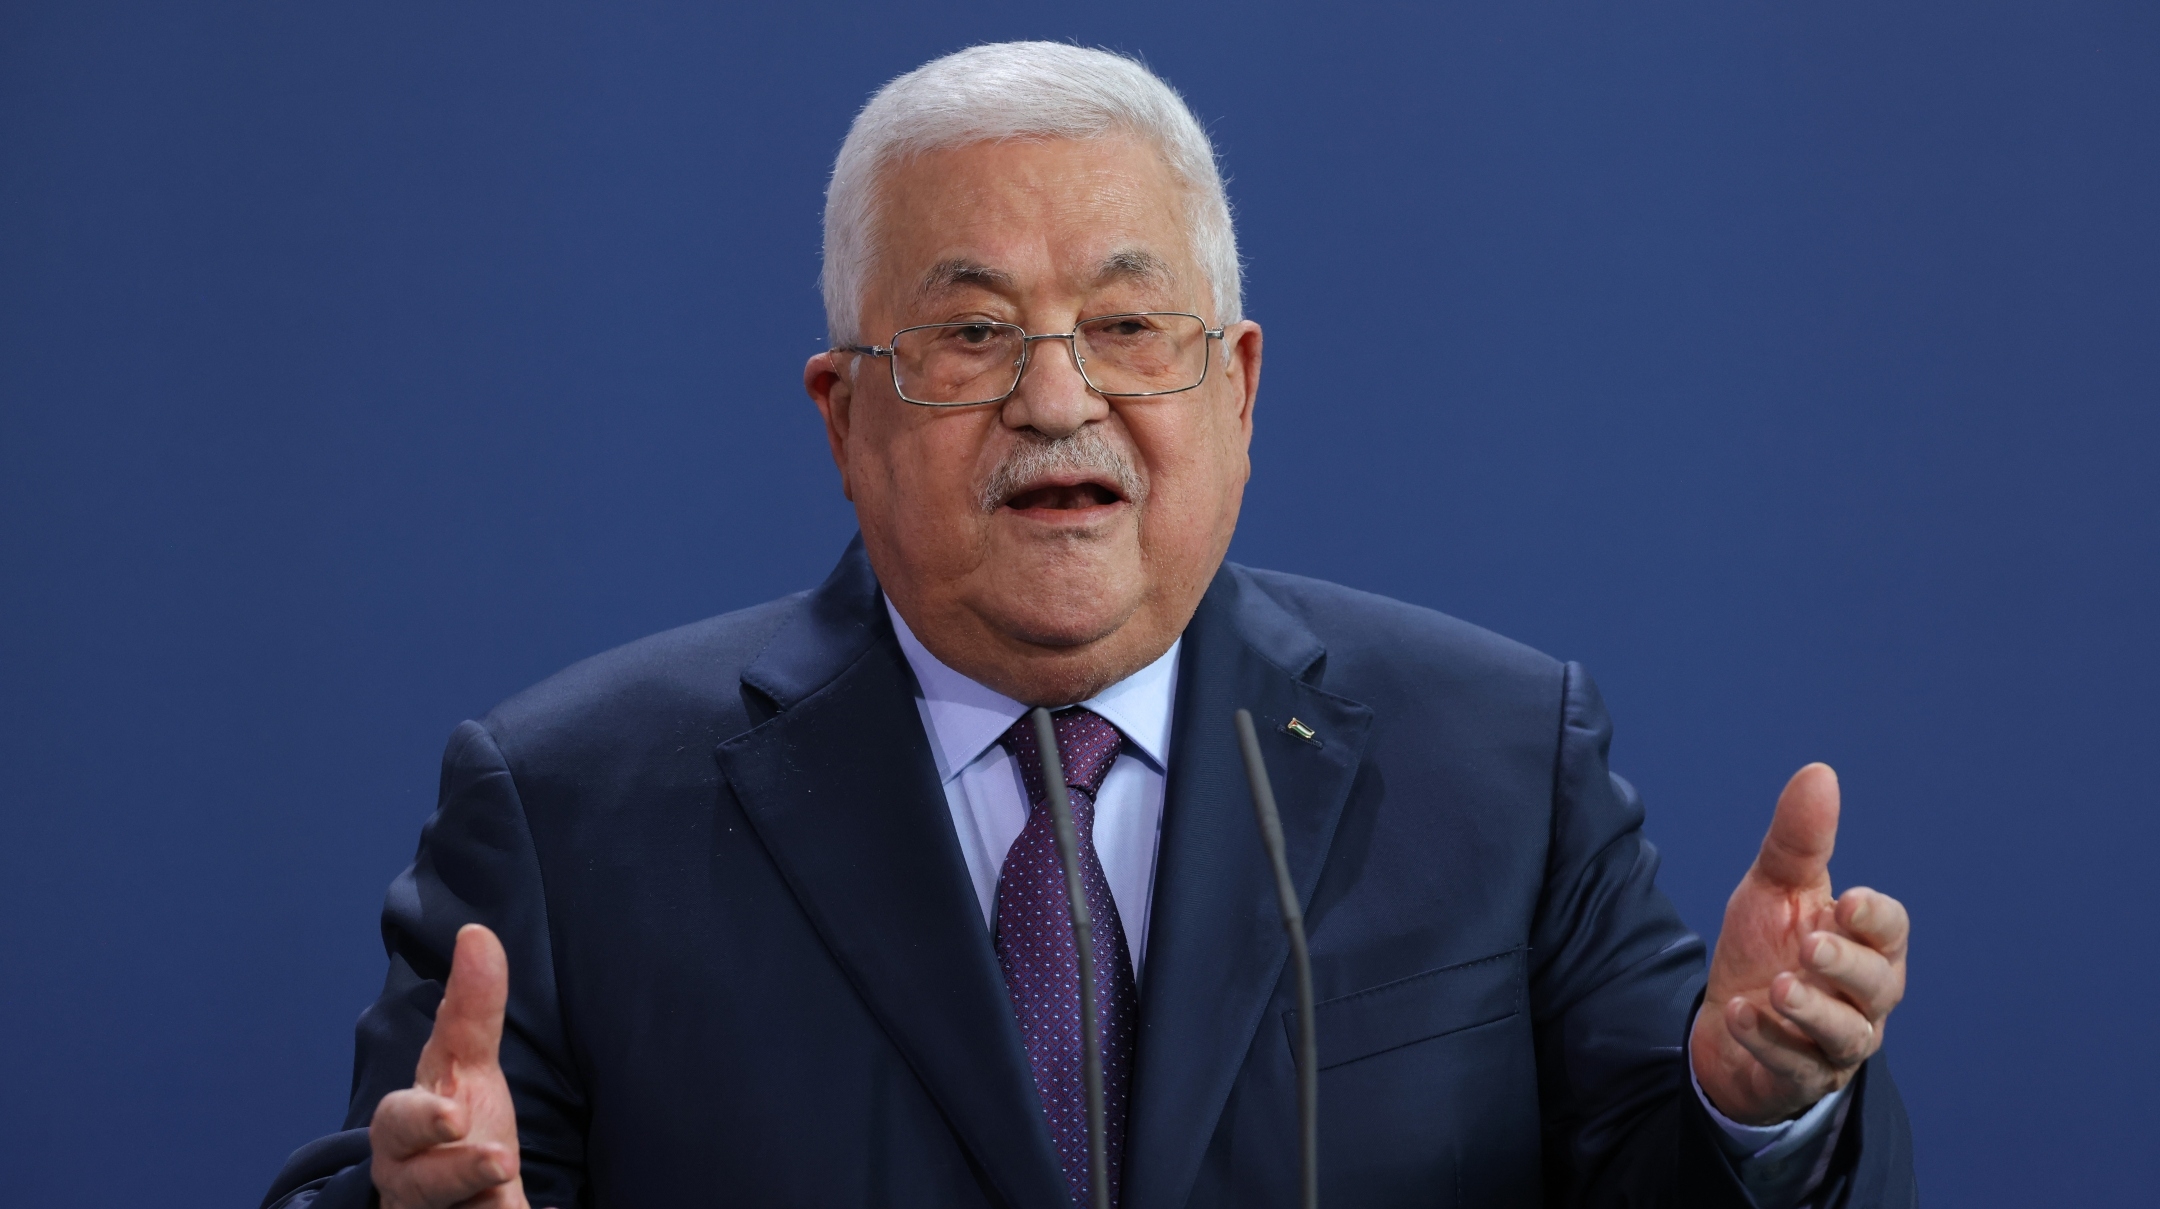 Abbas calls Holocaust the ‘most heinous crime’ after drawing criticism for accusing Israel of ‘Holocausts’